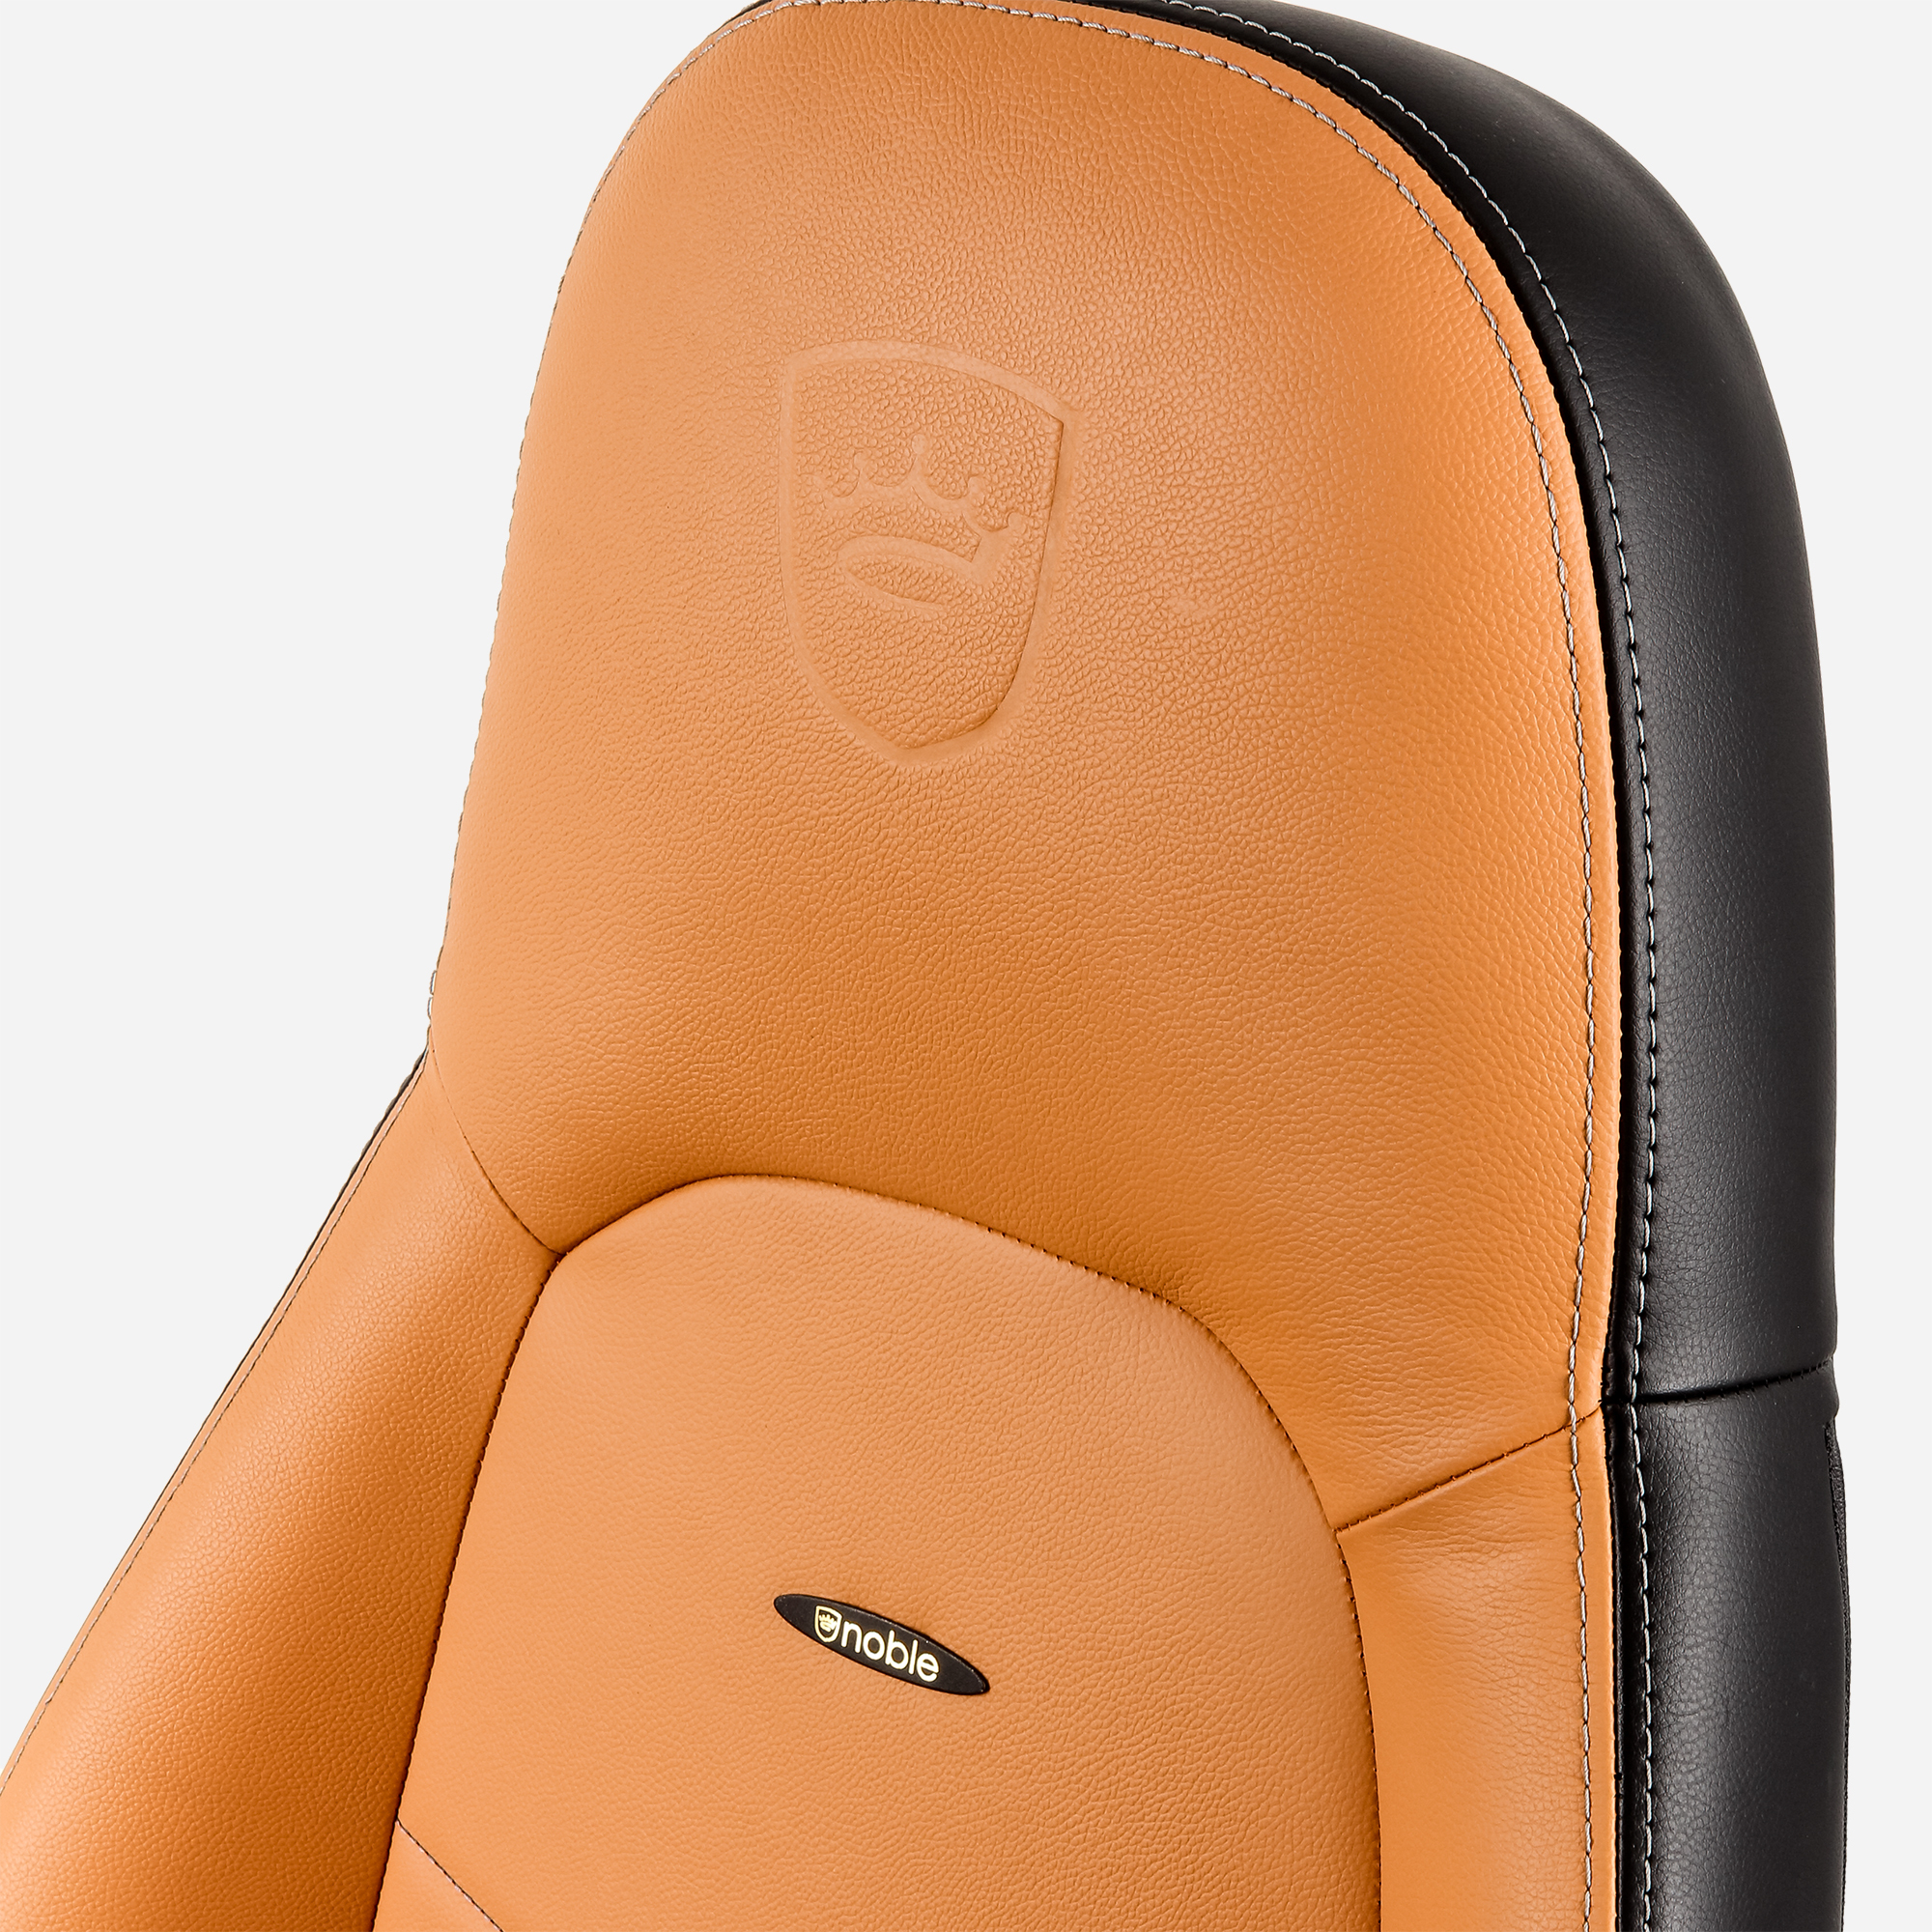 noblechairs - Cadeira noblechairs ICON Real Leather Cognac / Preto